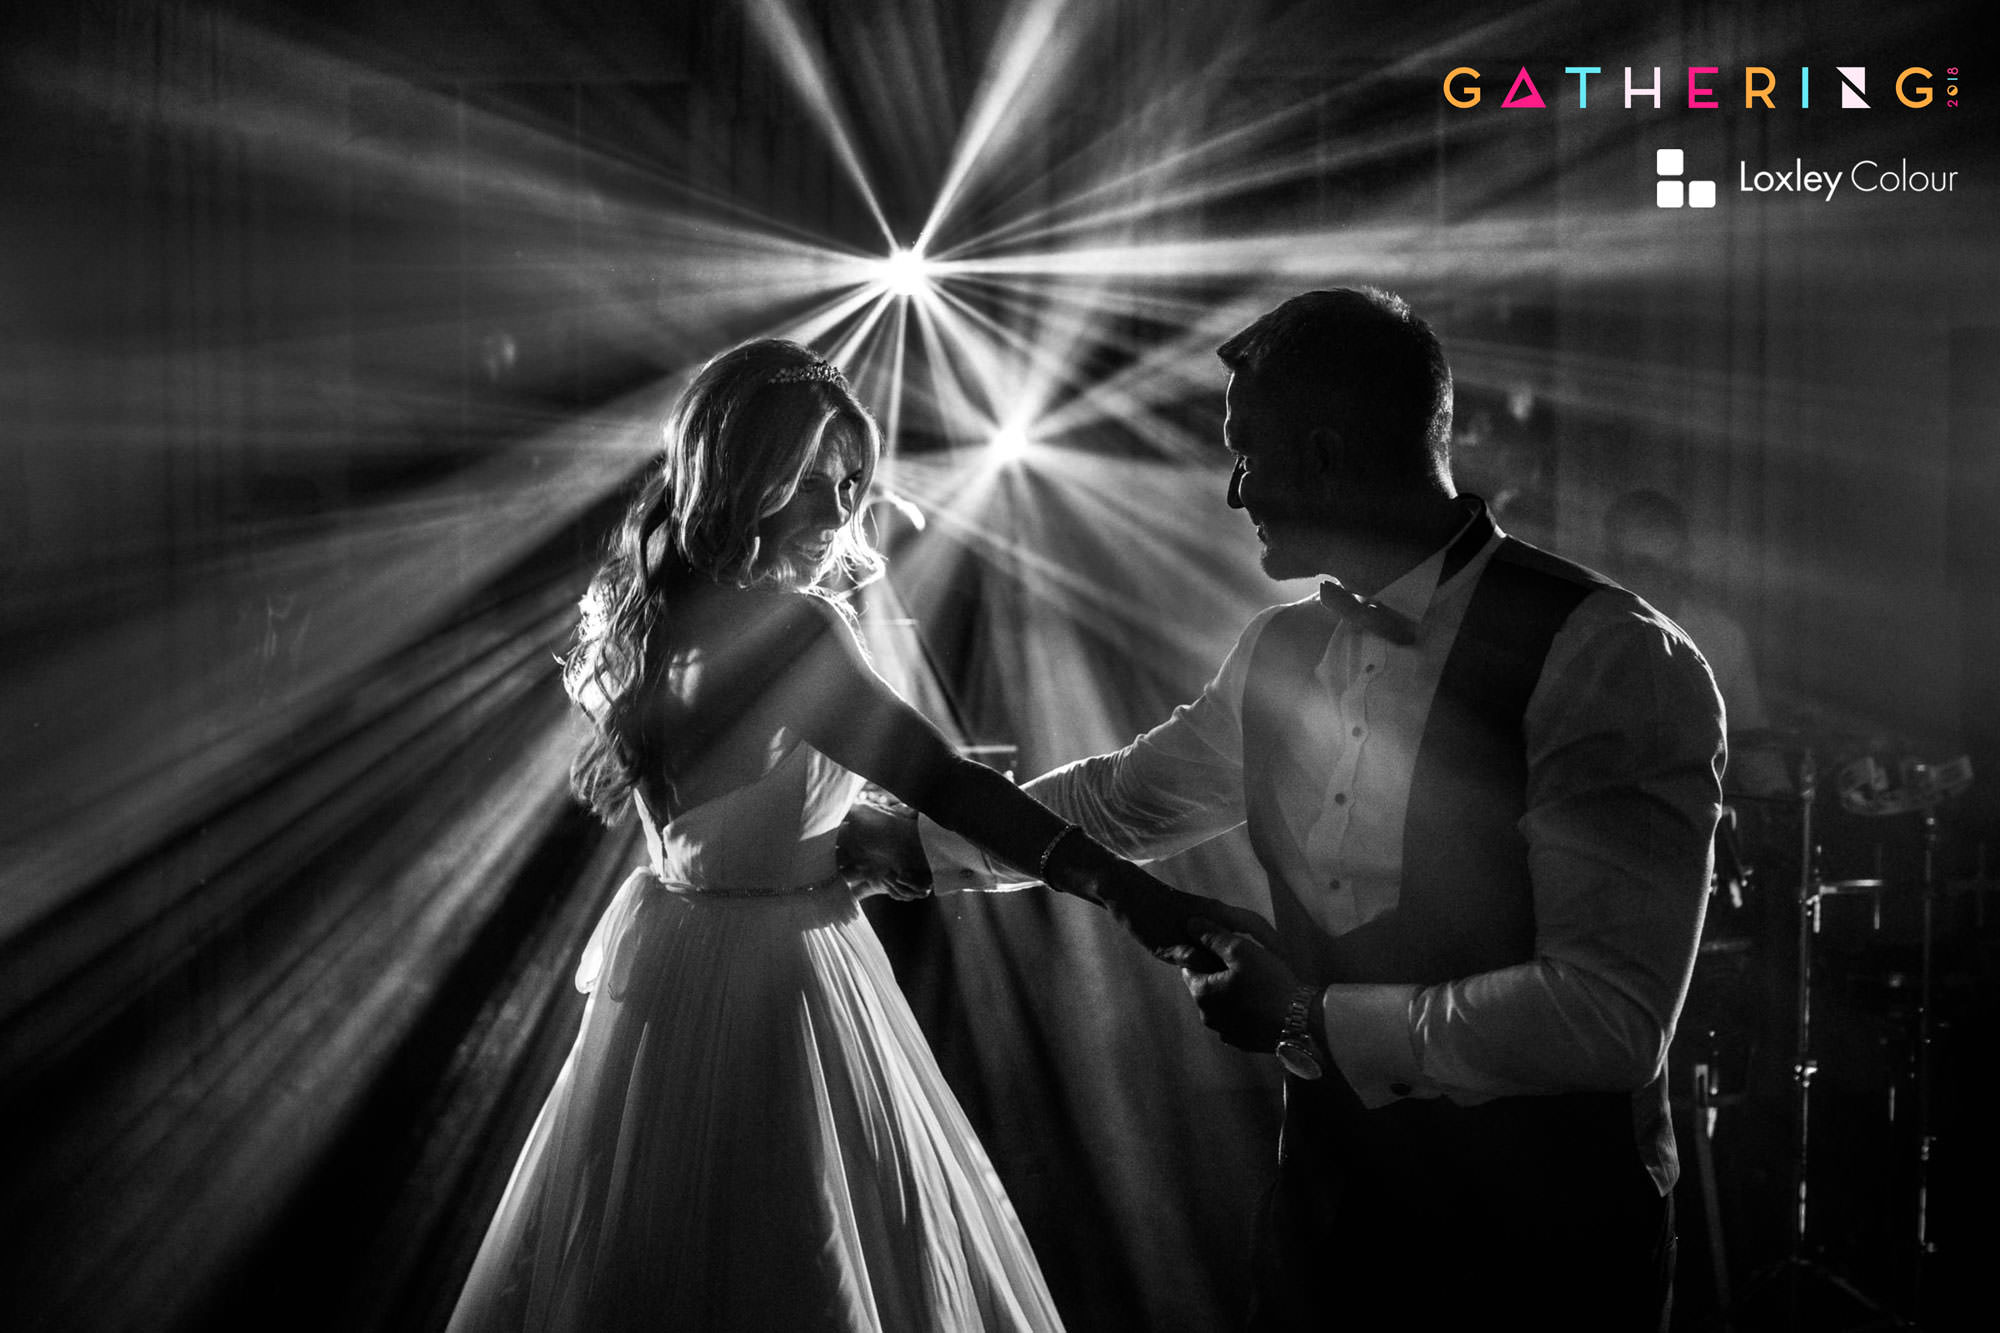 NineDots Gathering Print Competition 2018 sponsored by Loxley Colour - The Ultimate Wedding Photography Conference